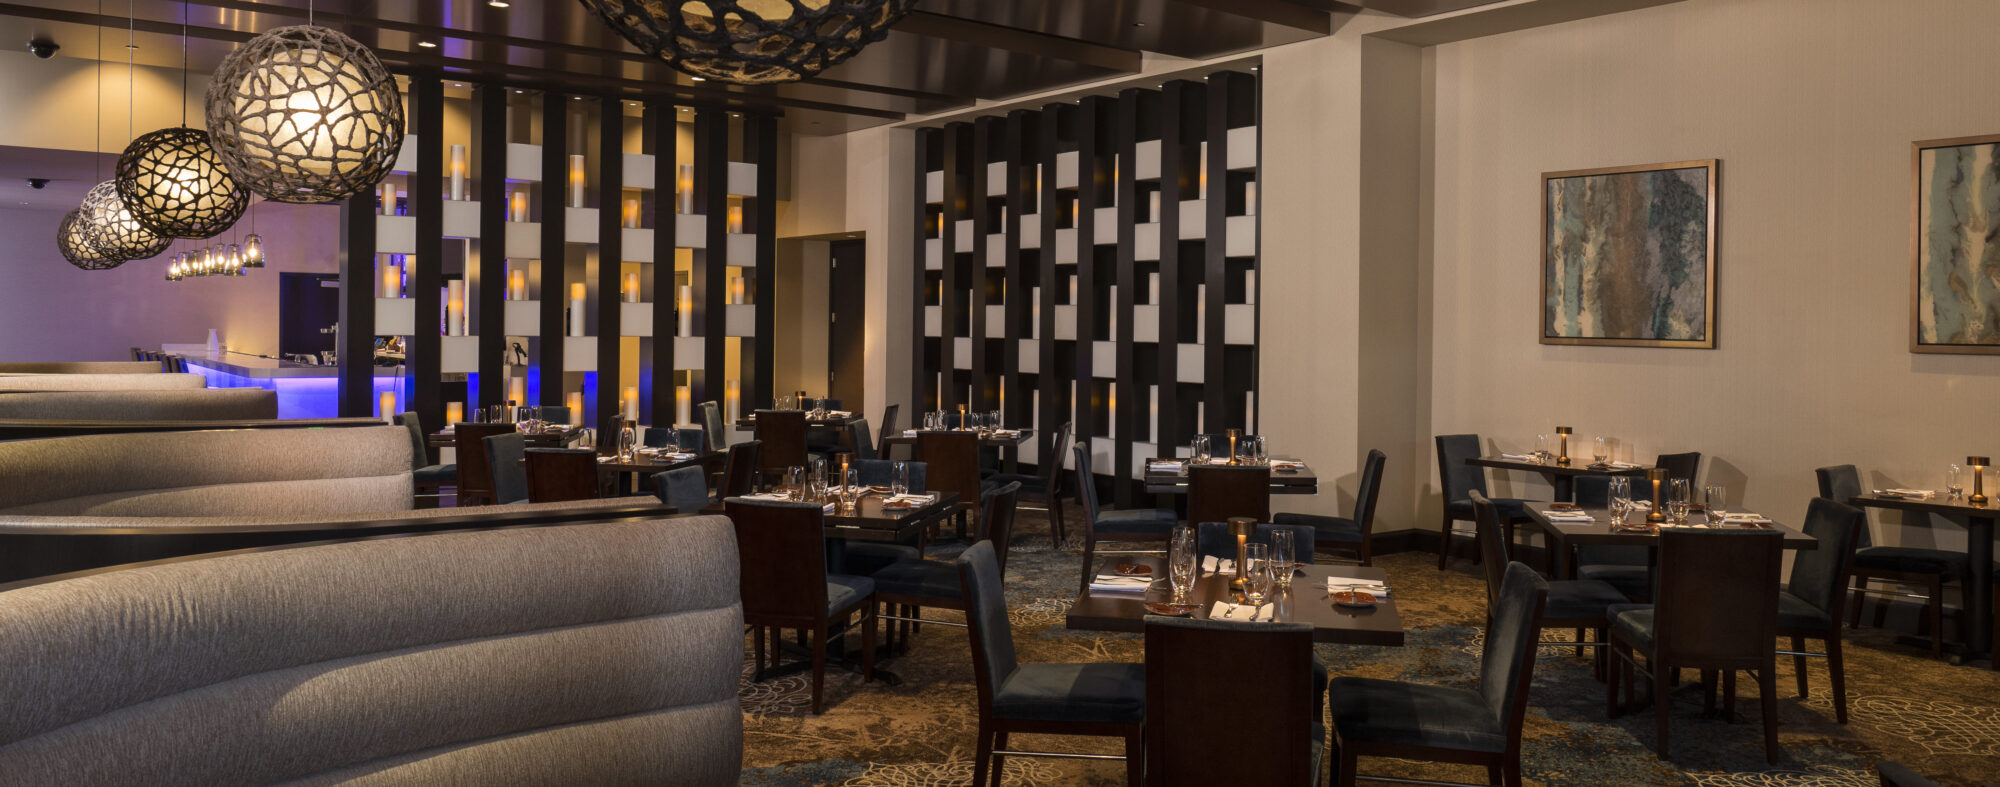 Glenn Rieder fabricated and installed custom interior finishes of their restaurant venues for the Chumash Casino located in Santa Ynez CA.